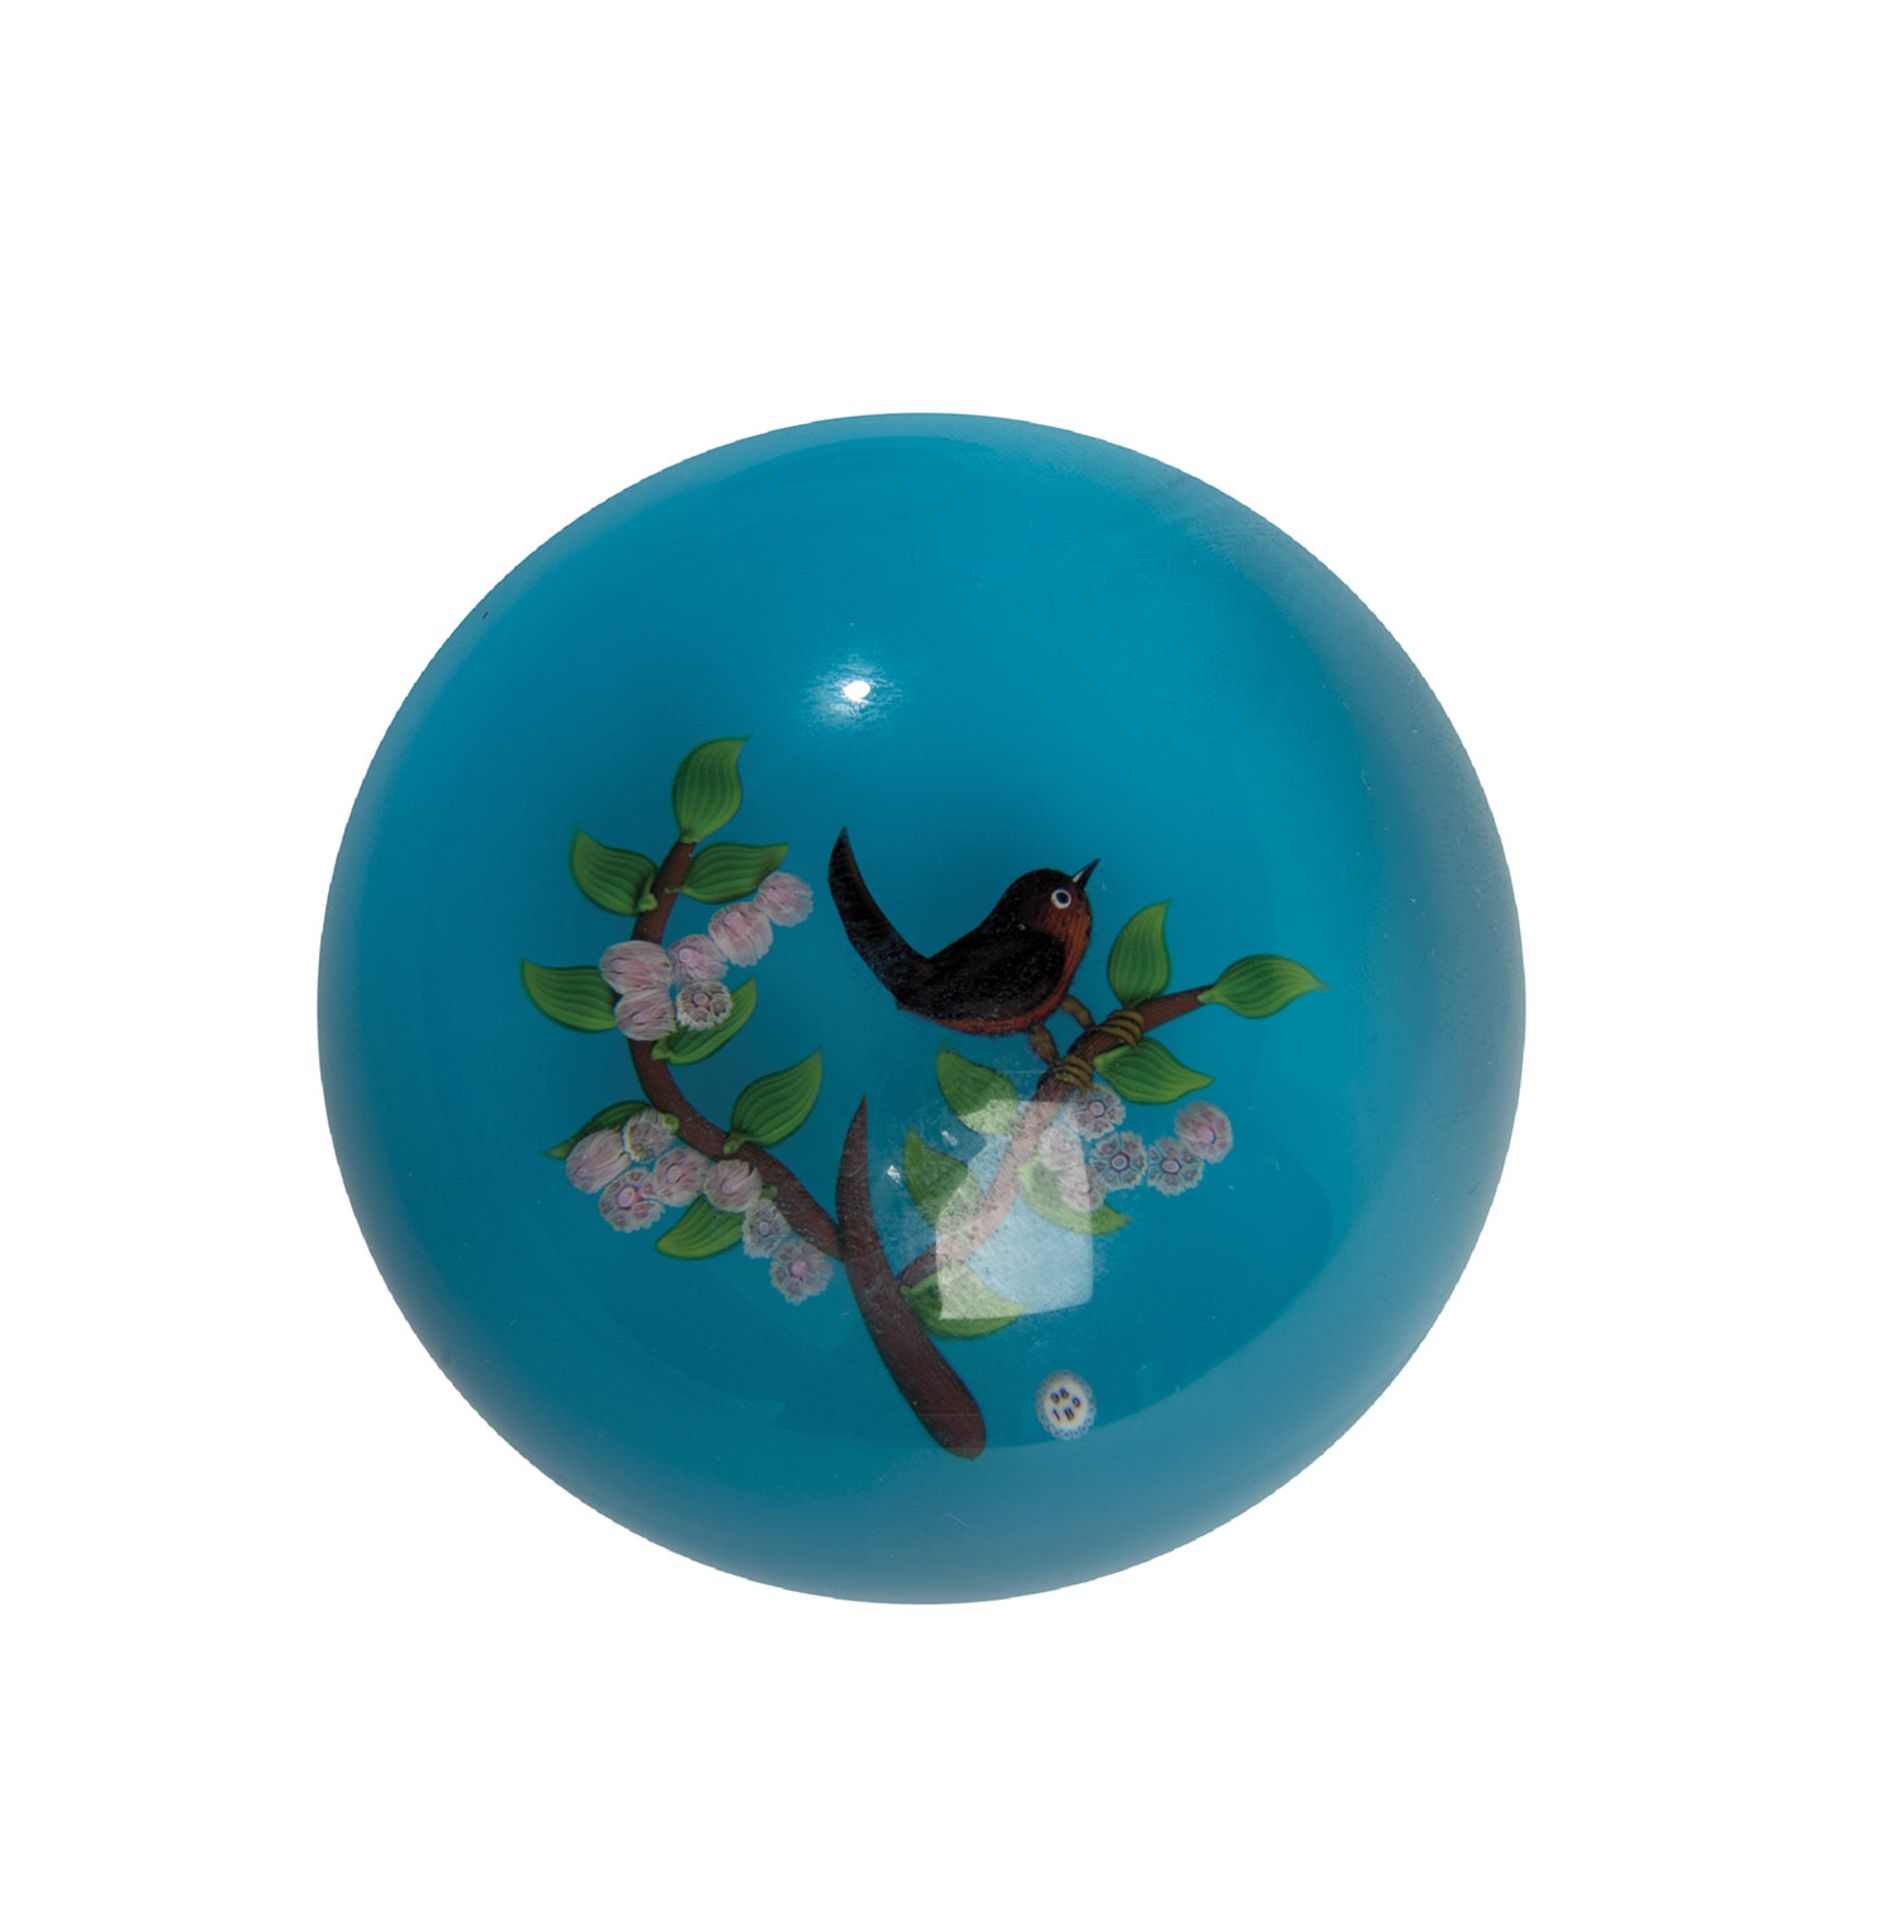 Paperweight Baccarat, 1989 Frosted glass upholstery with turquoise overlay. Blackbird on flower